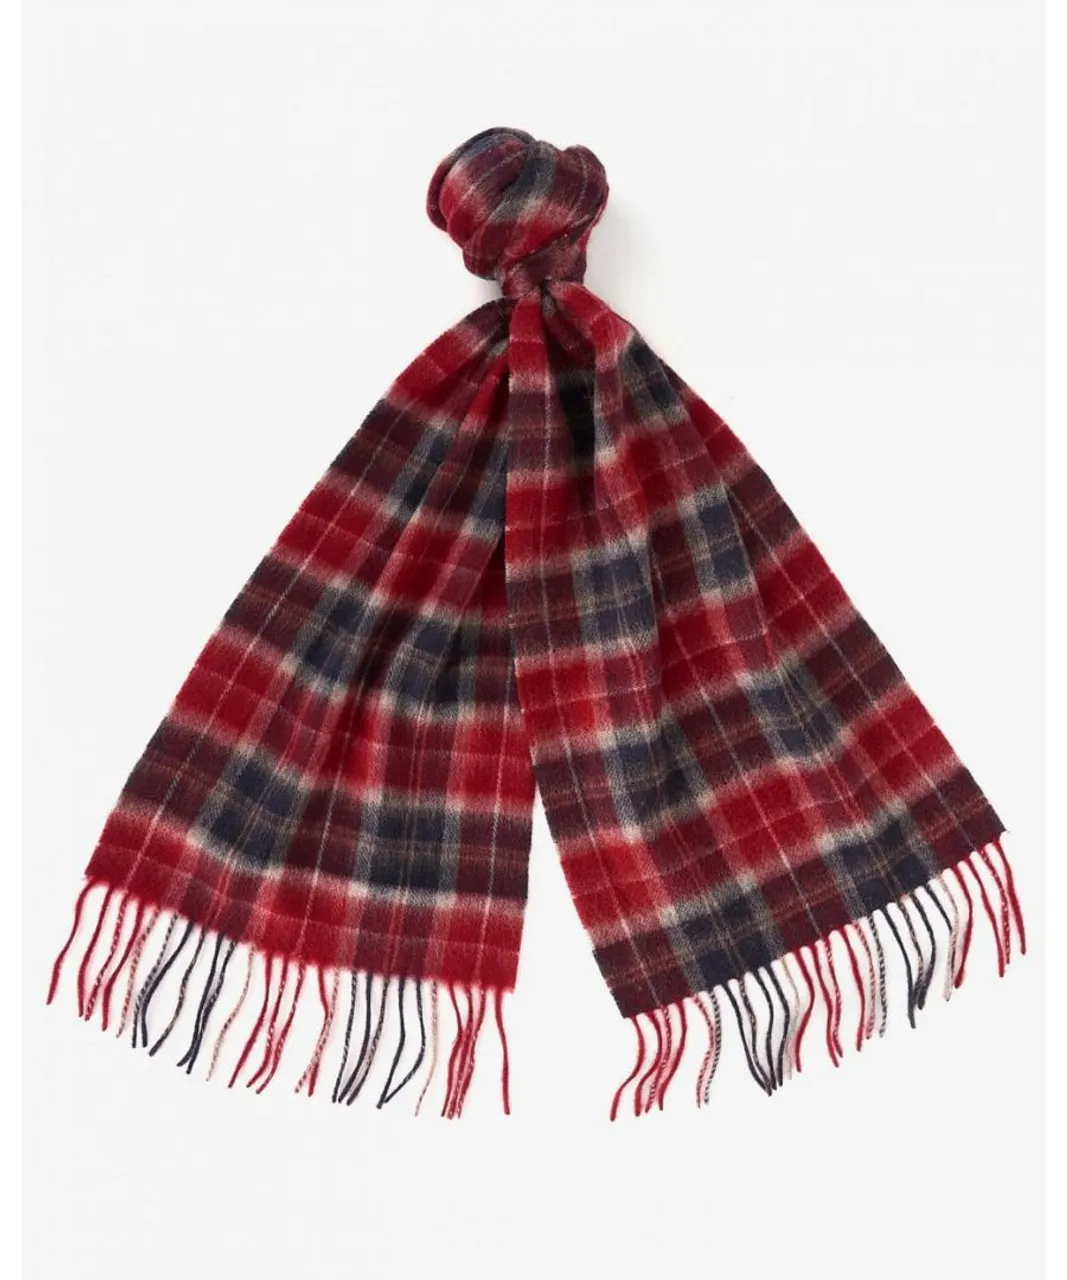 Barbour Tartan Mens Scarf & Glove Gift Set - Red - One